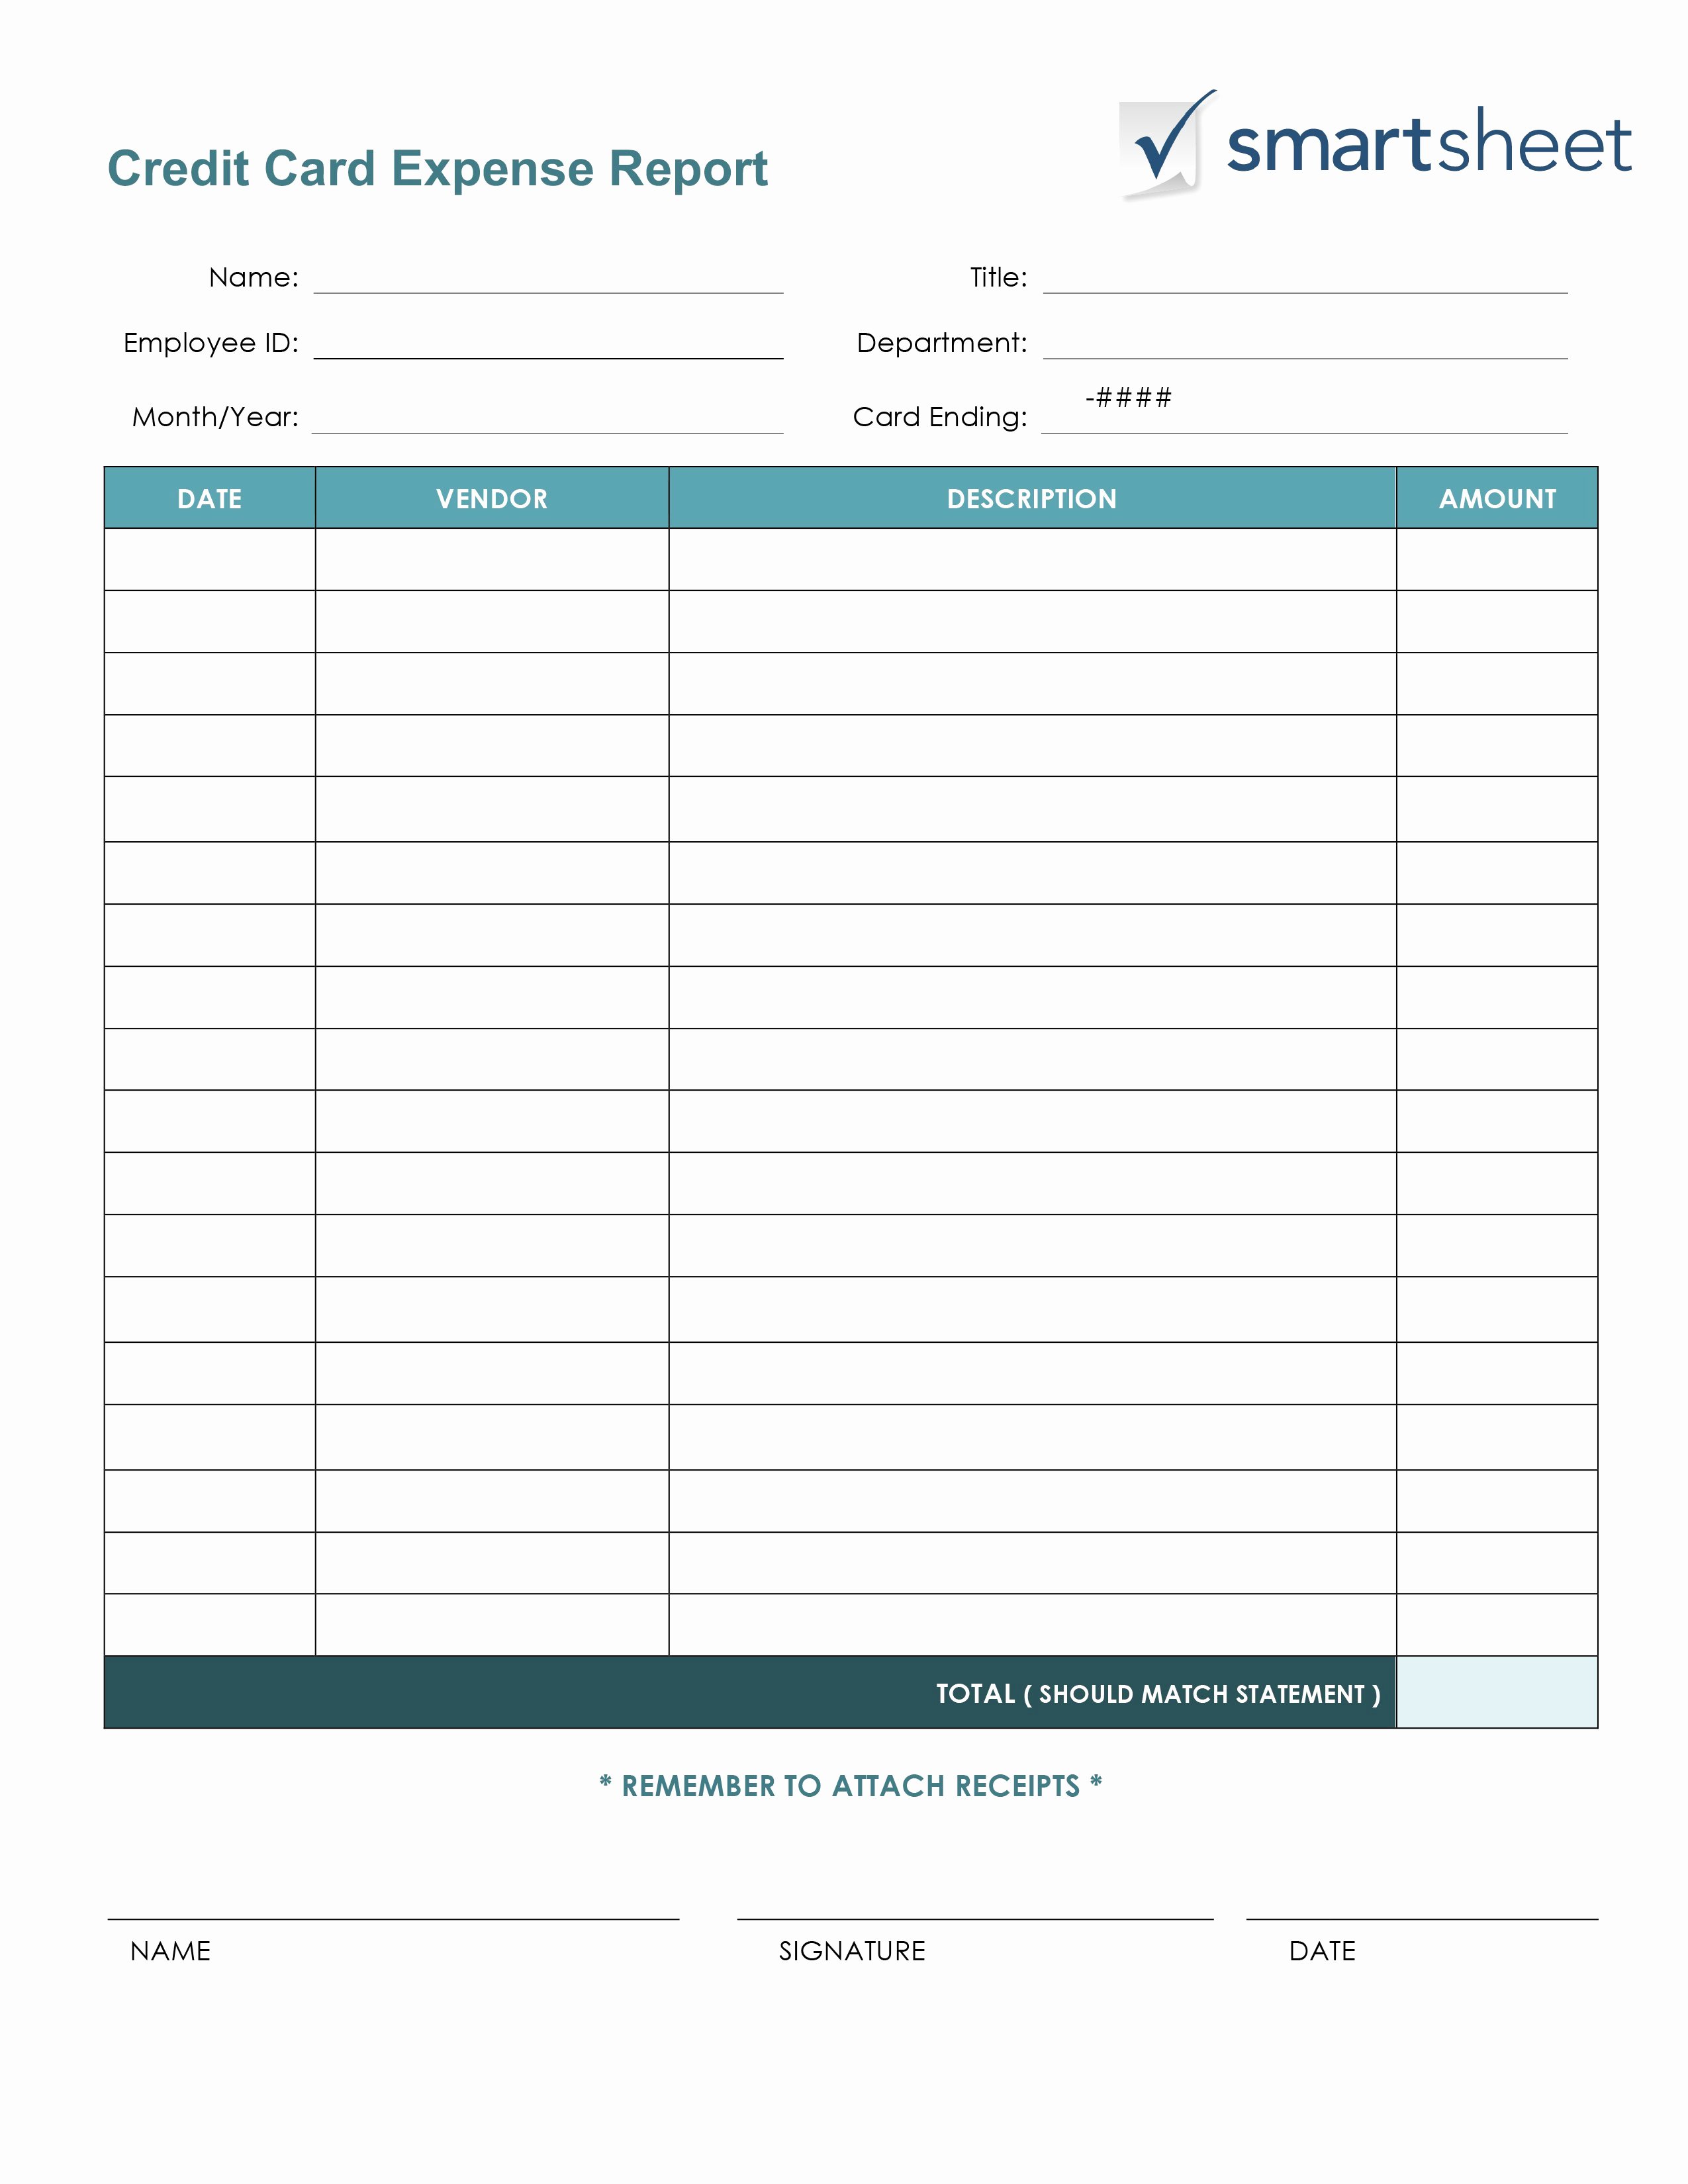 Expense Report Template Free Best Of Free Expense Report Templates Smartsheet